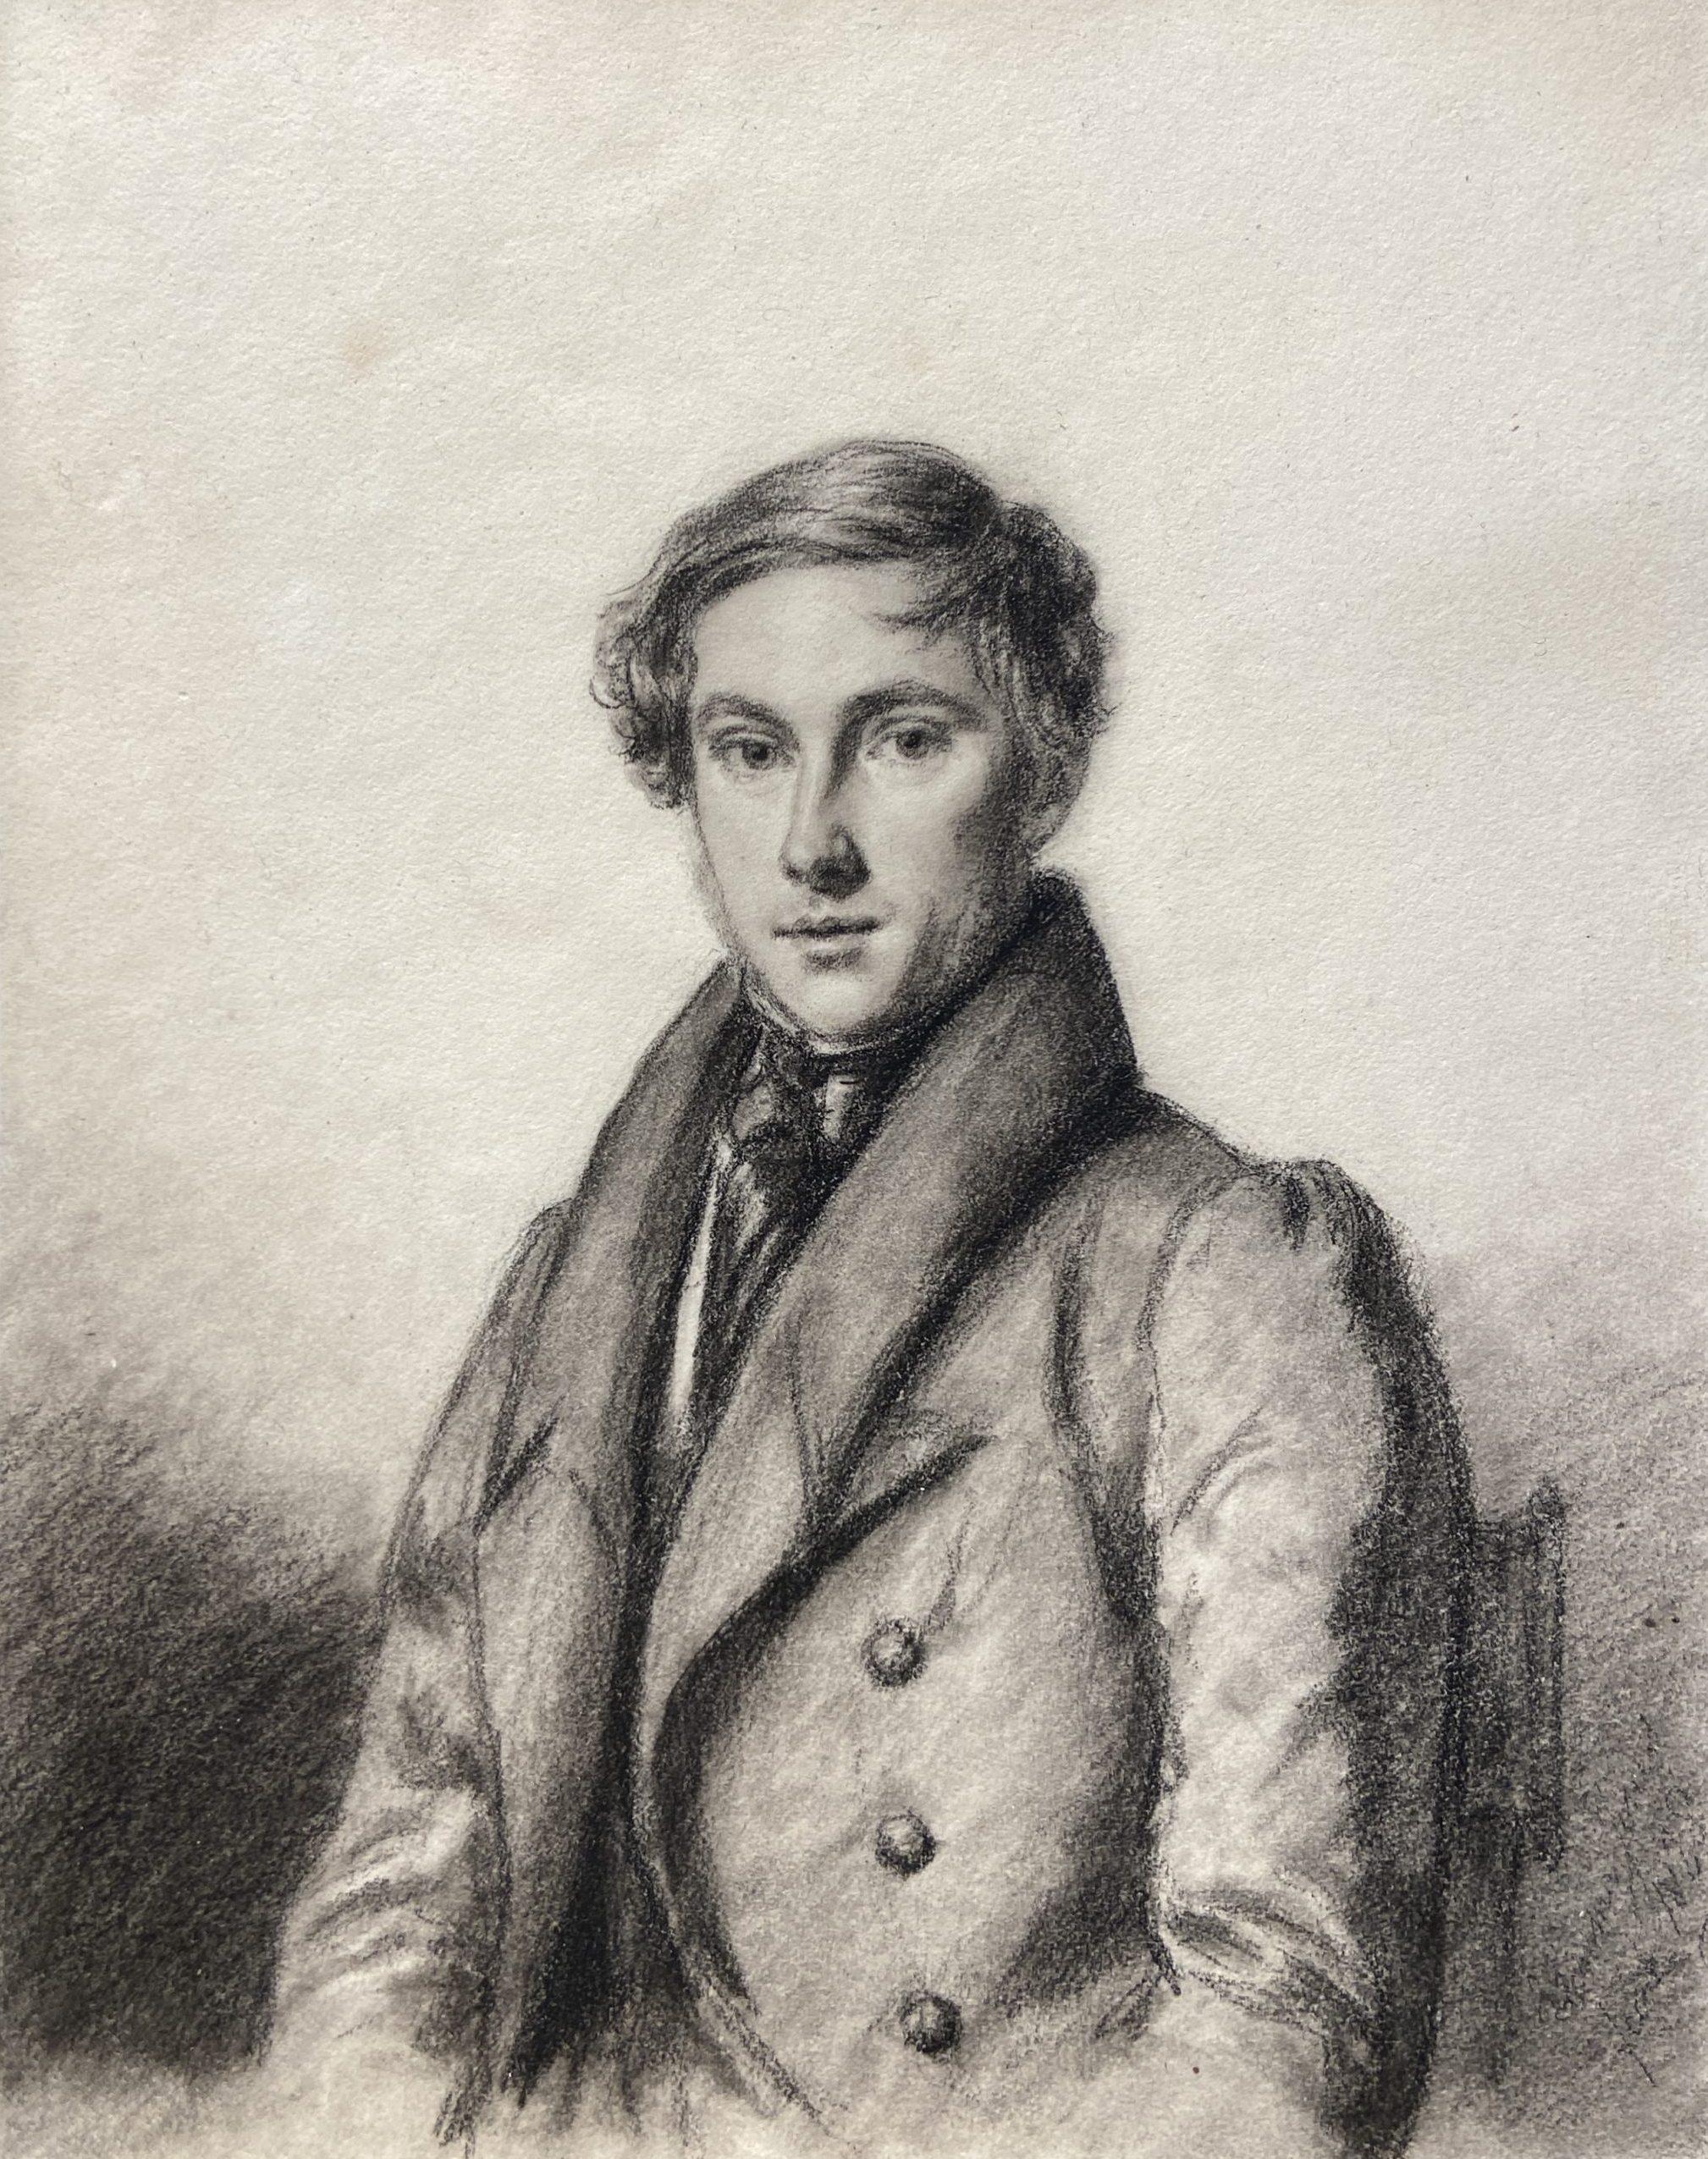 Portrait of a Young Man, 19th Century English, Charcoal, Signed and Dated '1888' - Art by 19th Century English School